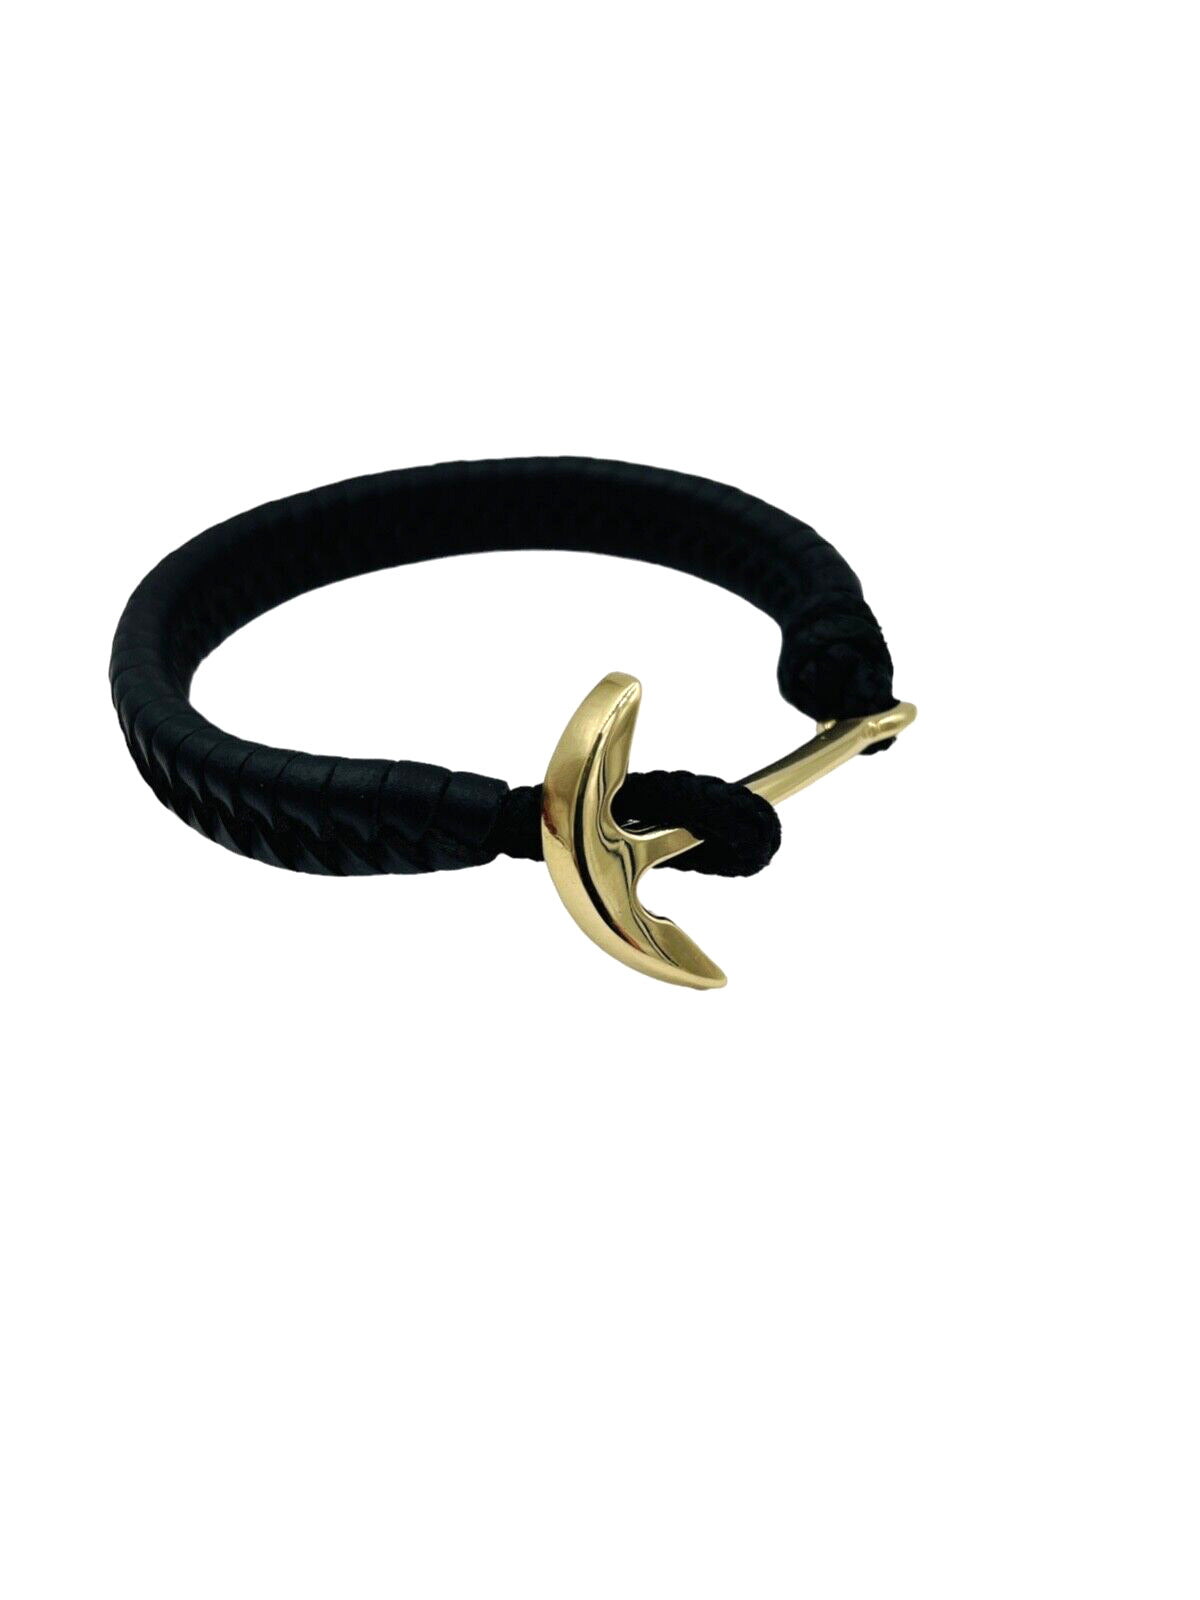 14k Yellow Gold Anchor Bracelet On A Leather Strap 8"